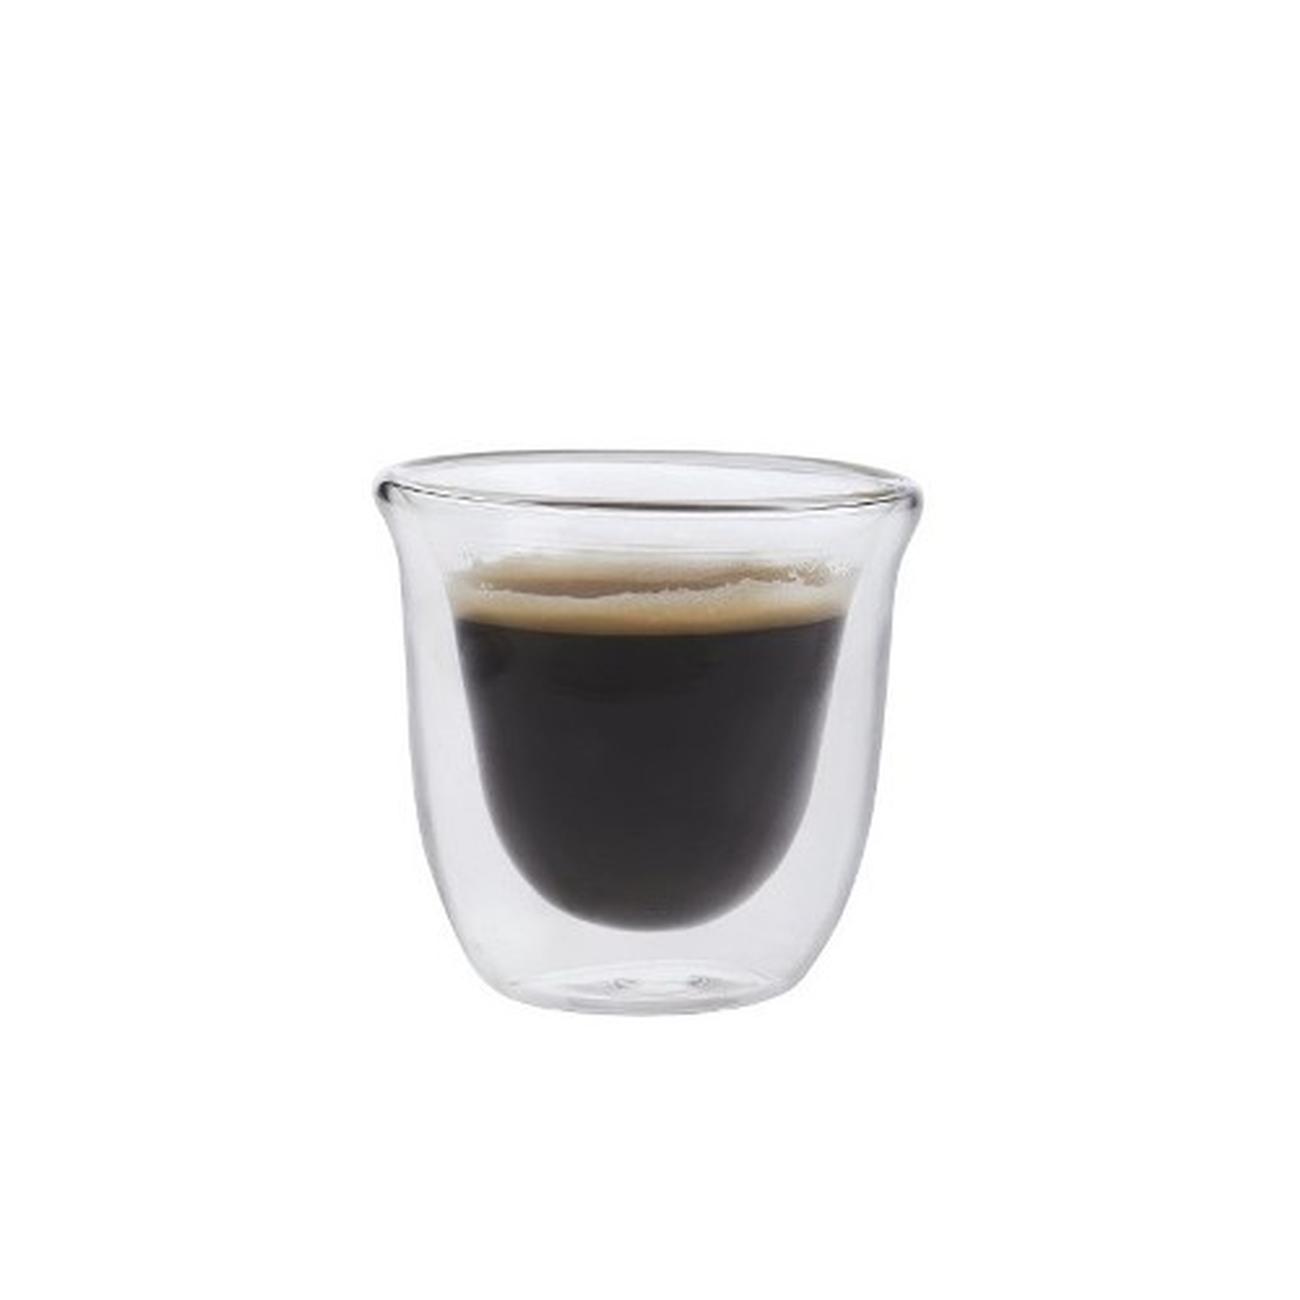 https://www.thekitchenwhisk.ie/contentfiles/productImages/Large/1604418526774_LCJackEspressoGlasses4pc1.jpg